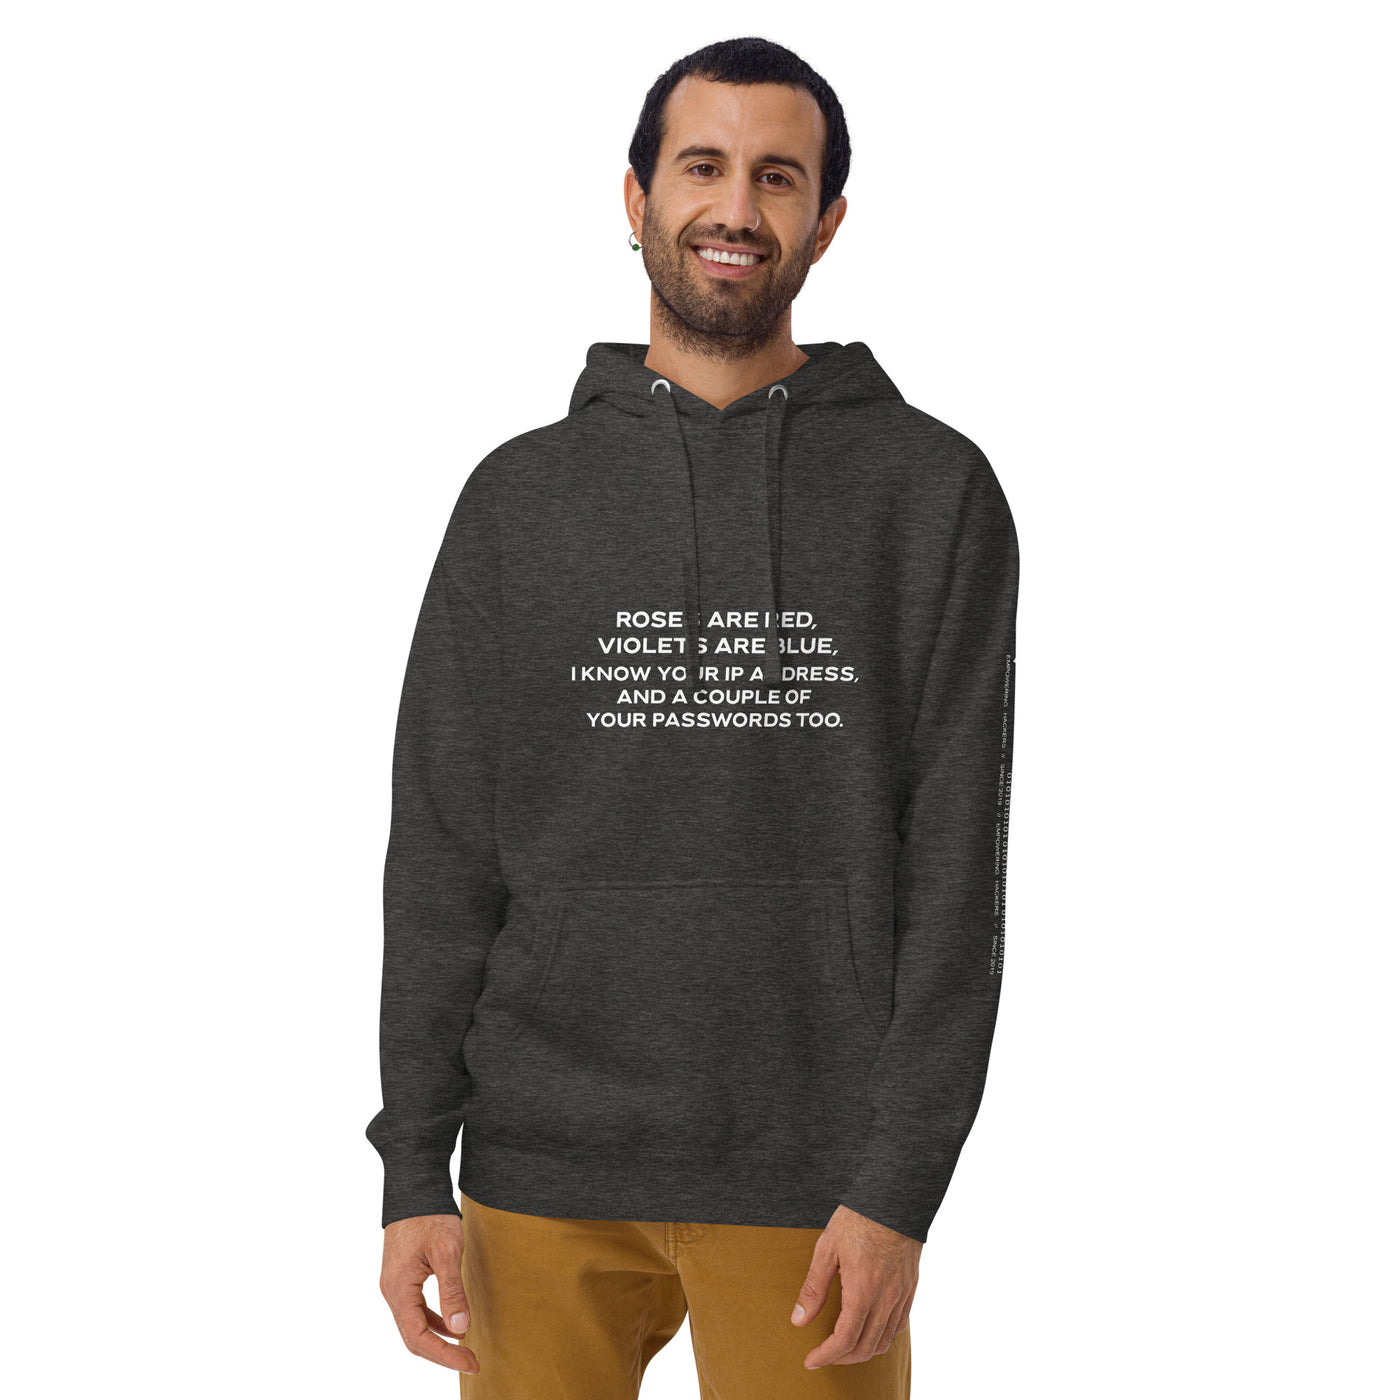 Roses are red, I know your IP and Passwords V1 - Unisex Hoodie